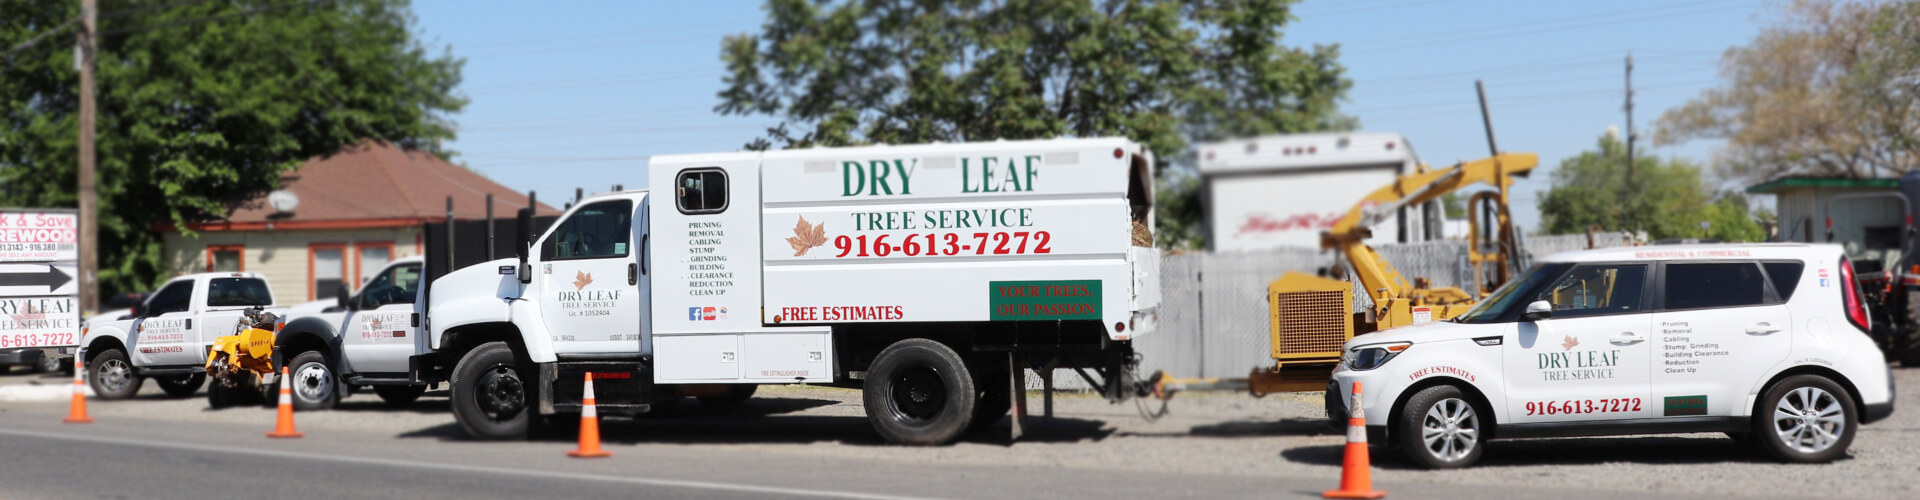 Dry Leaf Tree Service - contact-us